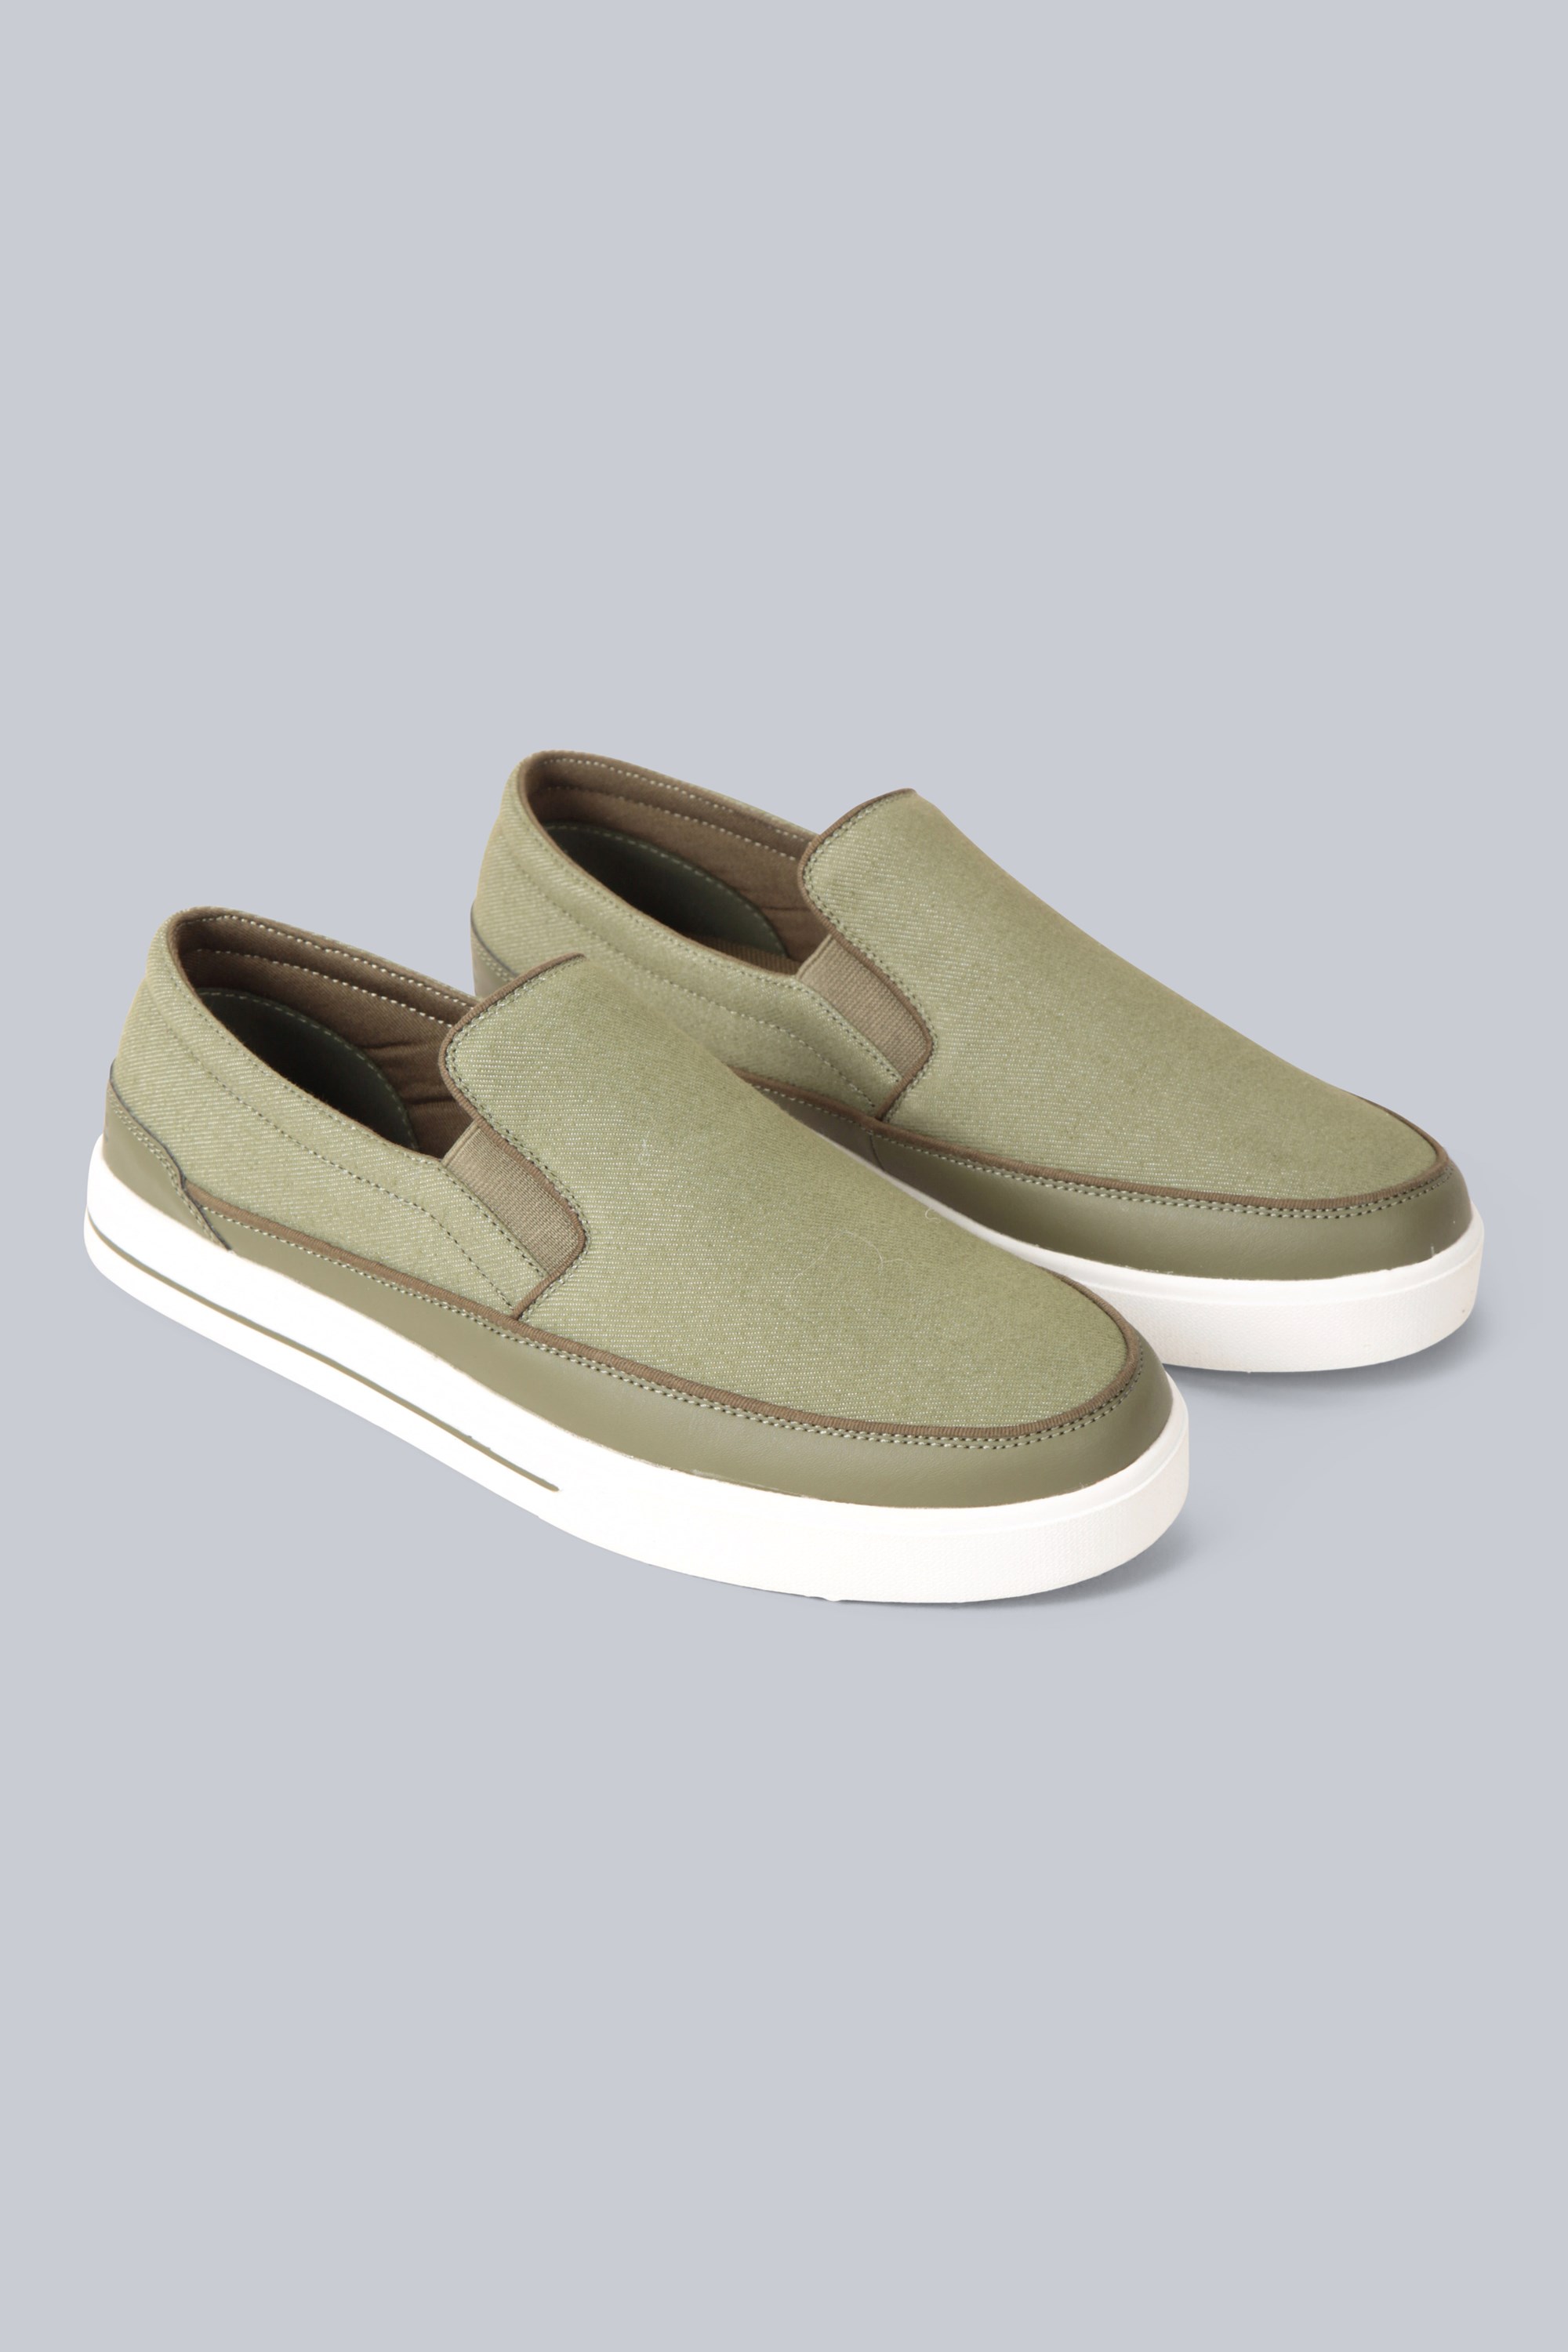 Cromer Mens Recycled Shoes - Green